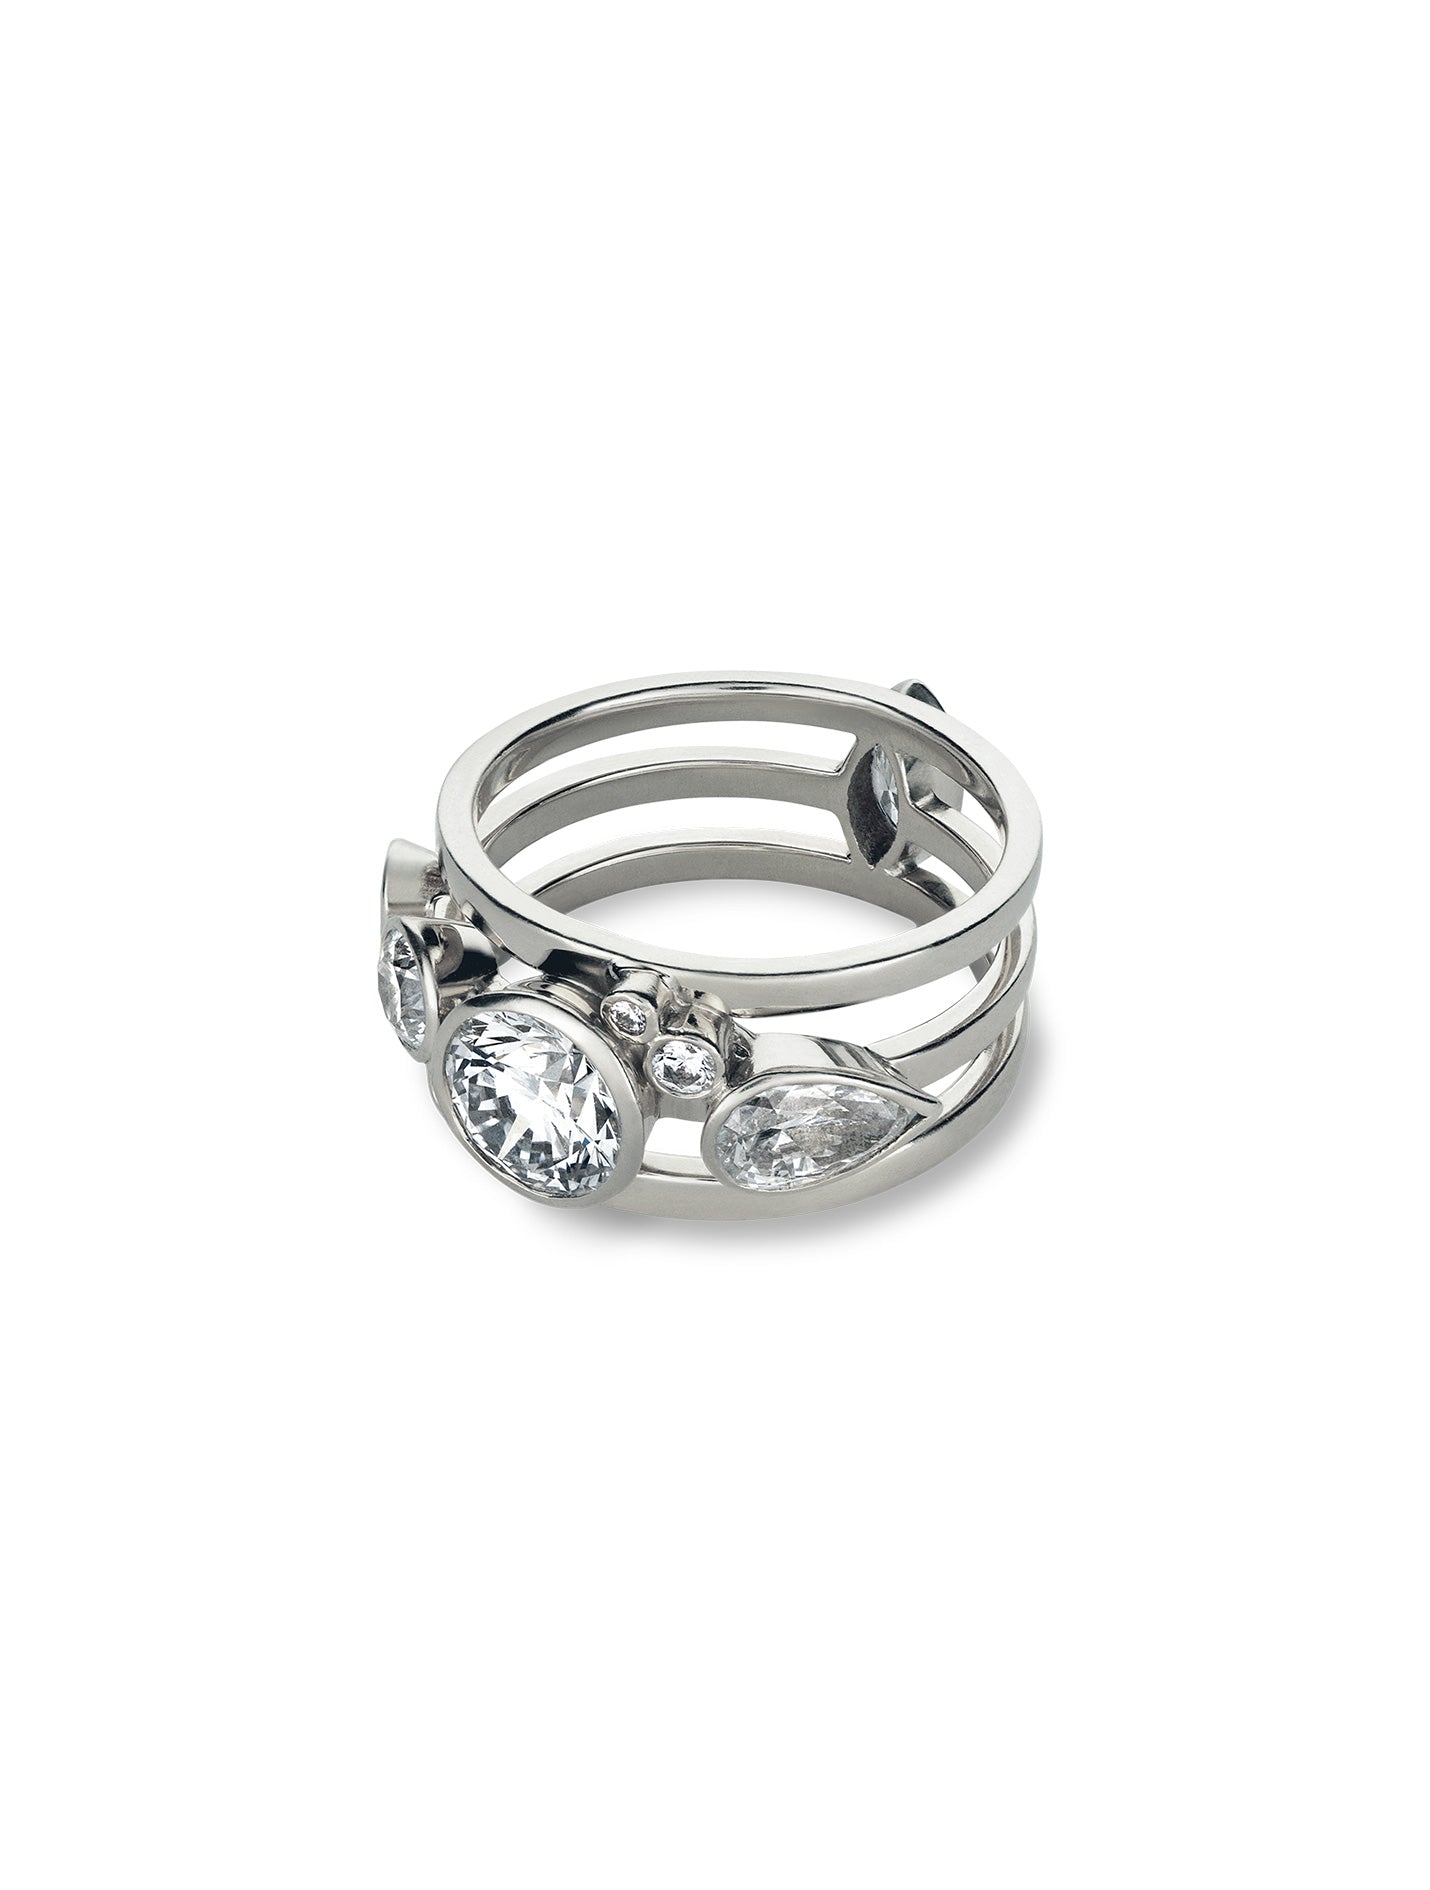 High Five - Ring adorned with 2.63 carats diamonds